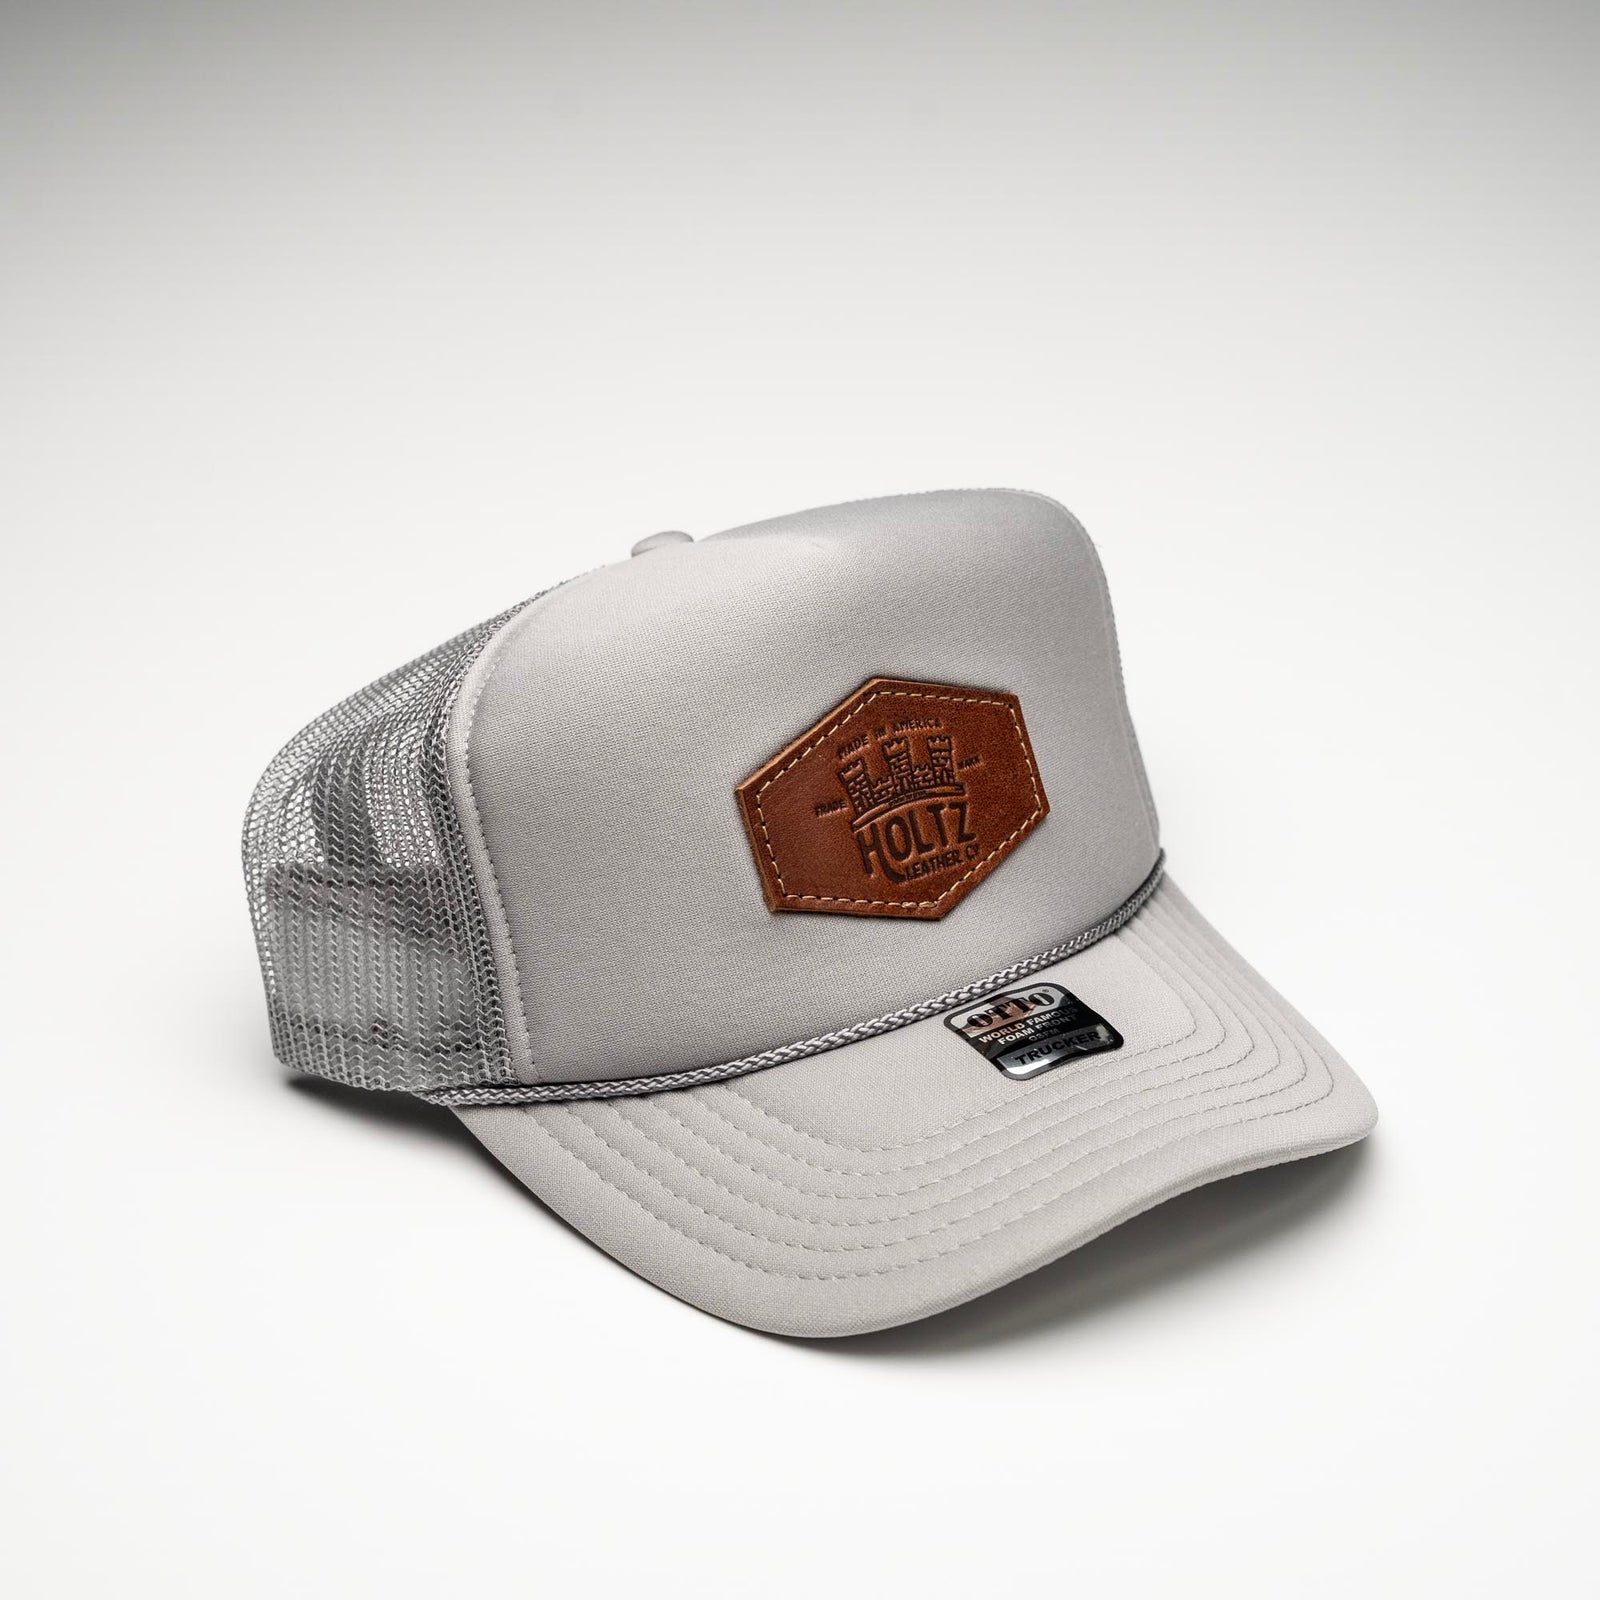 Debossed Heat Pressed - OTTO CAP 39-165 5 Panel High Crown Mesh Back Trucker Hat ~ Customized with YOUR LOGO